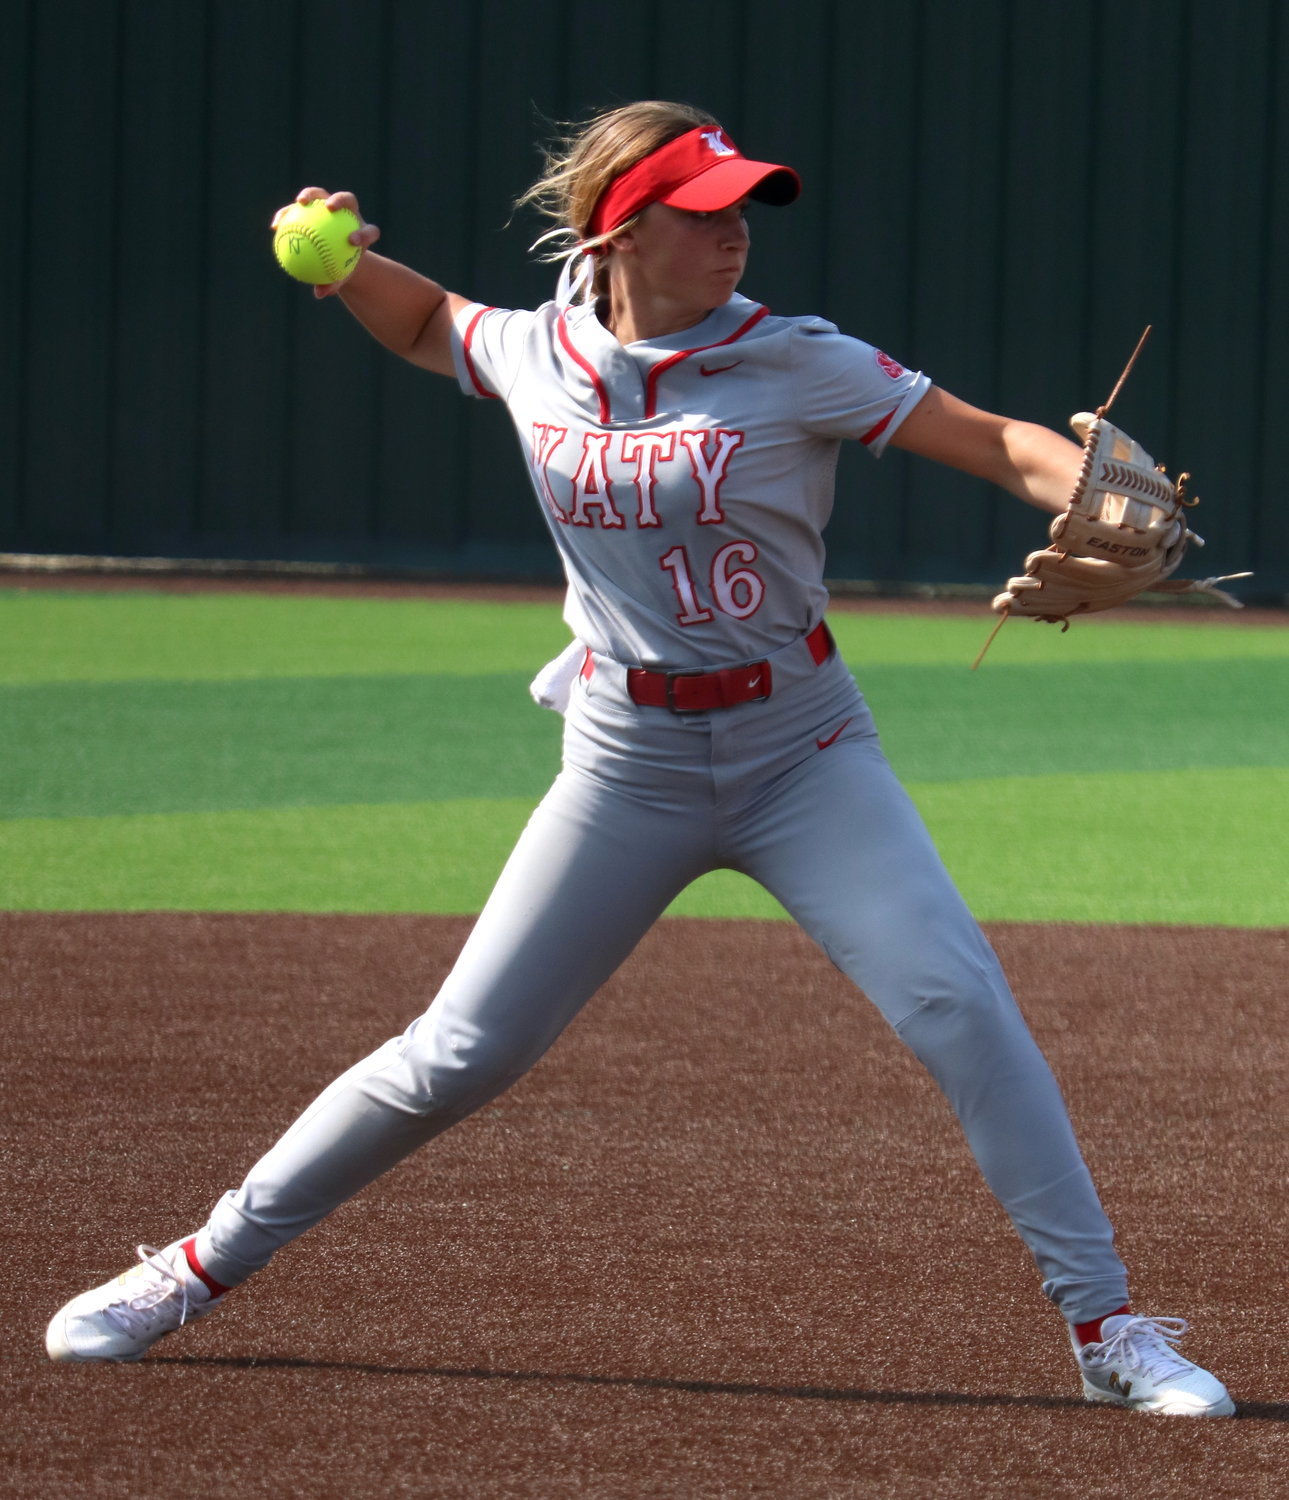 Hailey Gore throws to first base during Saturday’s area round game between Katy and Cy-Fair at Cy-Lakes.